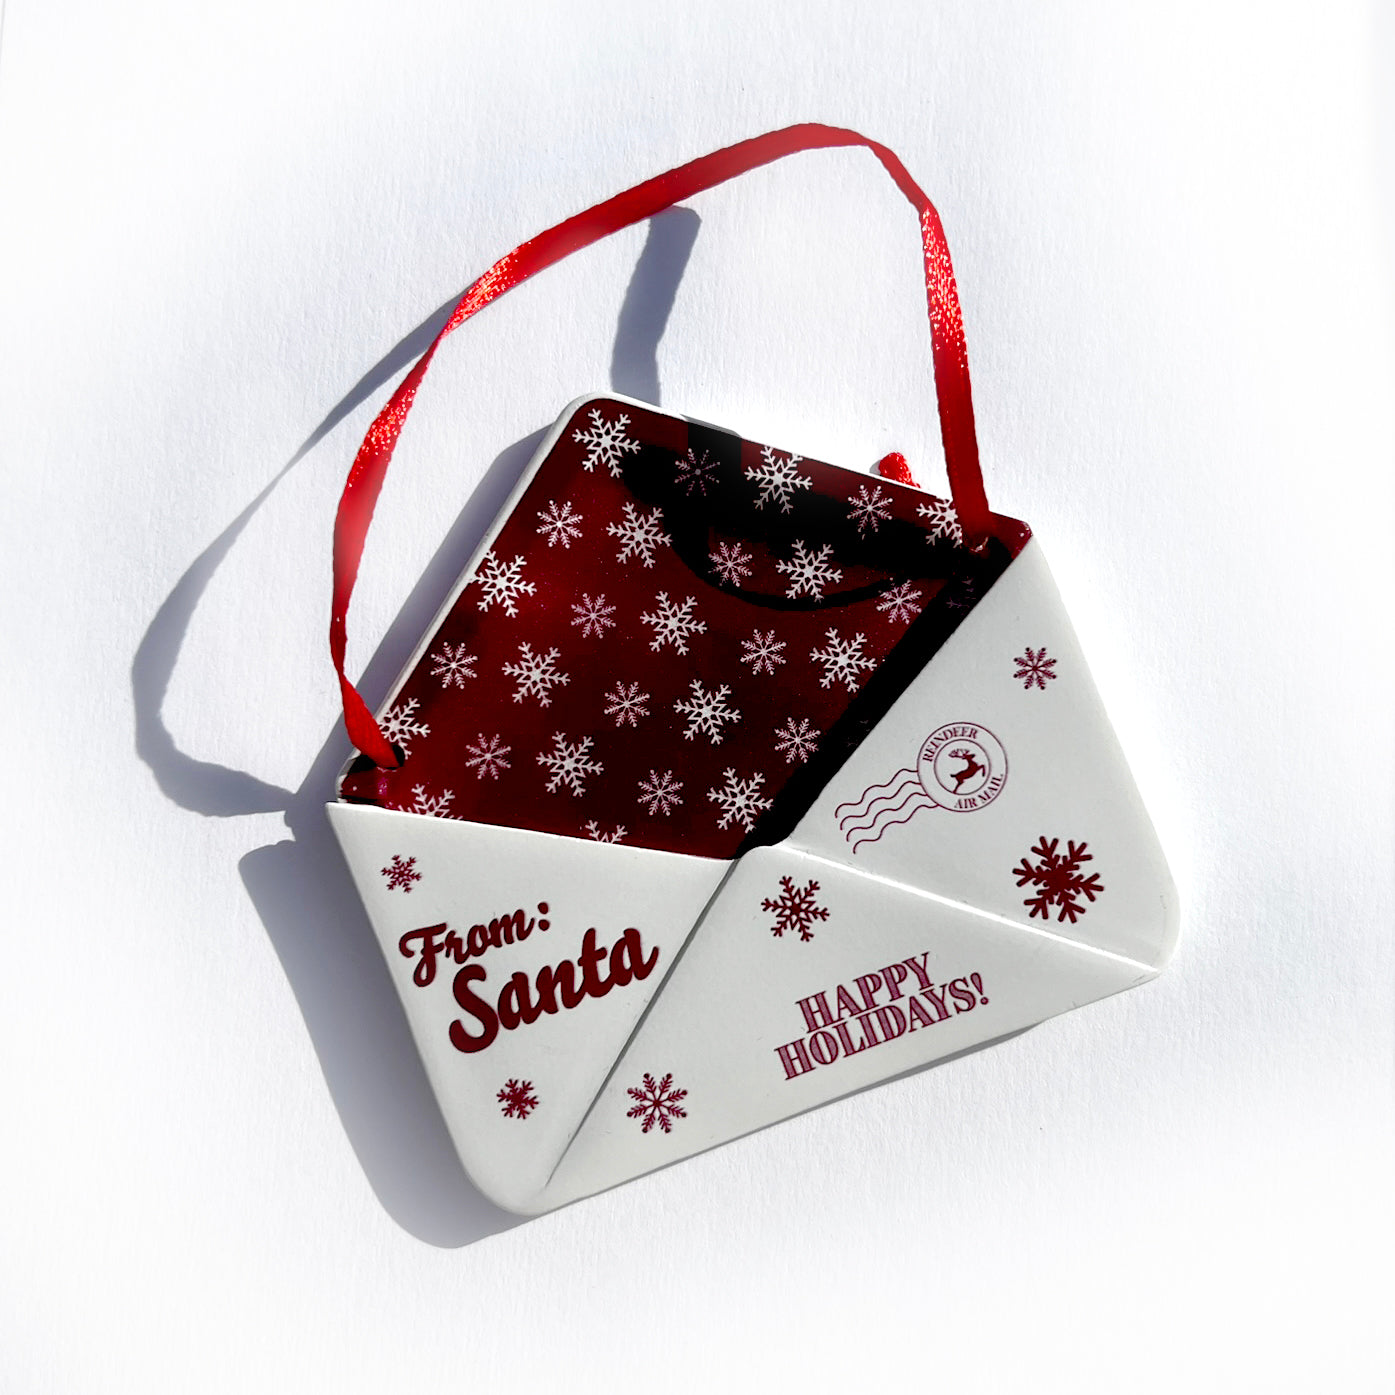 Christmas Collection (Note From Santa) Maroon Snowflake Envelope Resin Ornament with Letter